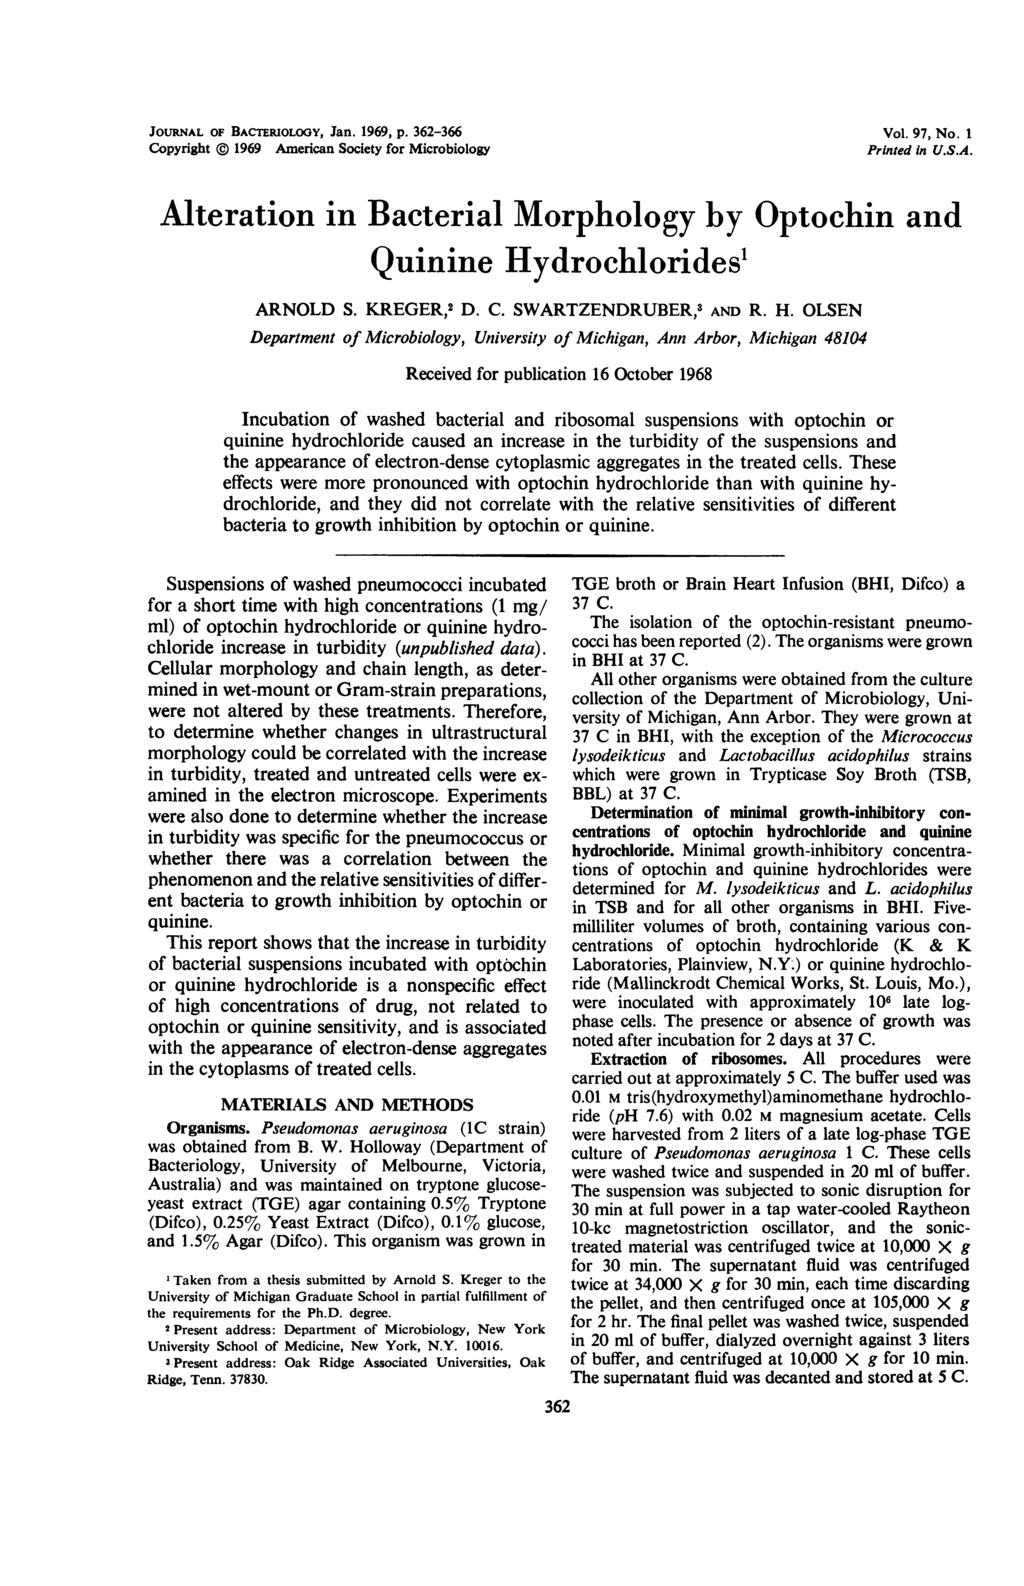 JOURNAL OF BACTERIOLOGY, Jan. 1969, p. 362-366 Copyright @ 1969 American Society for Microbiology Vol. 97, No. I Printed in U.S.A. Alteration in Bacterial Morphology by Optochin and Quinine Hydrochlorides1 ARNOLD S.